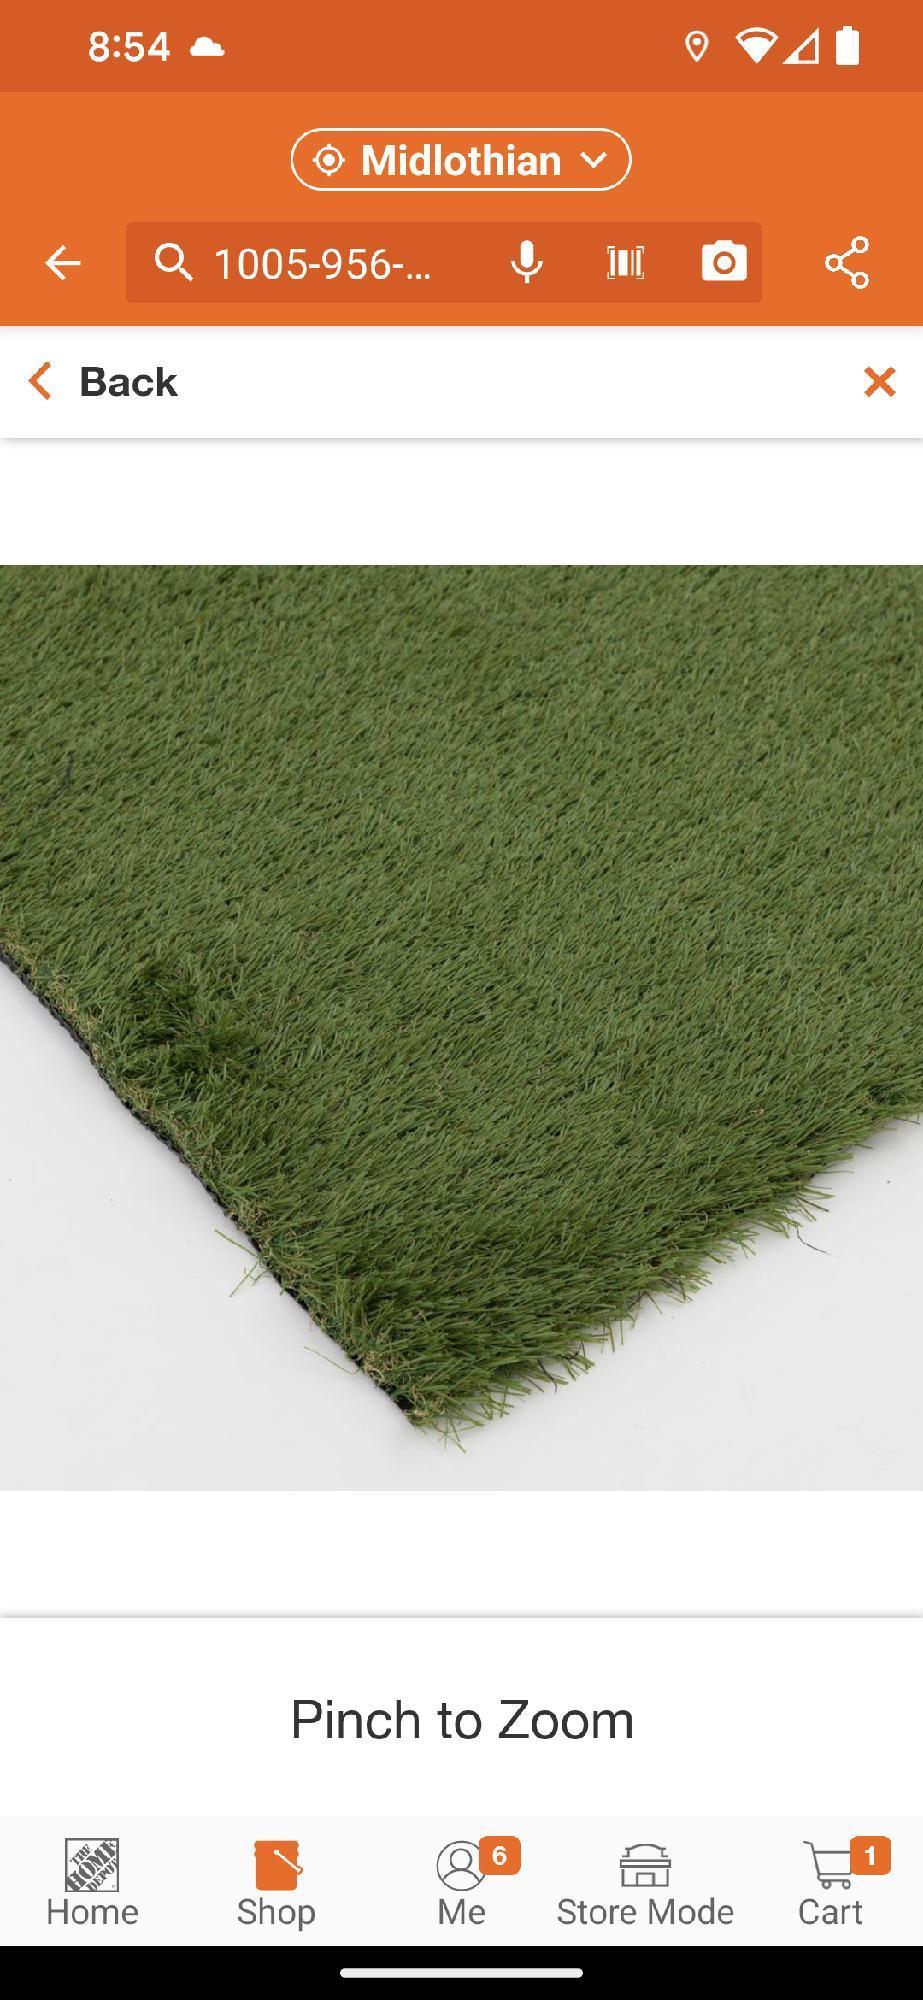 (1Roll) TrafficMaster 5 ft. x 7.5 ft. Lt. Green Artificial Grass Rug, Appears to be New in Factory